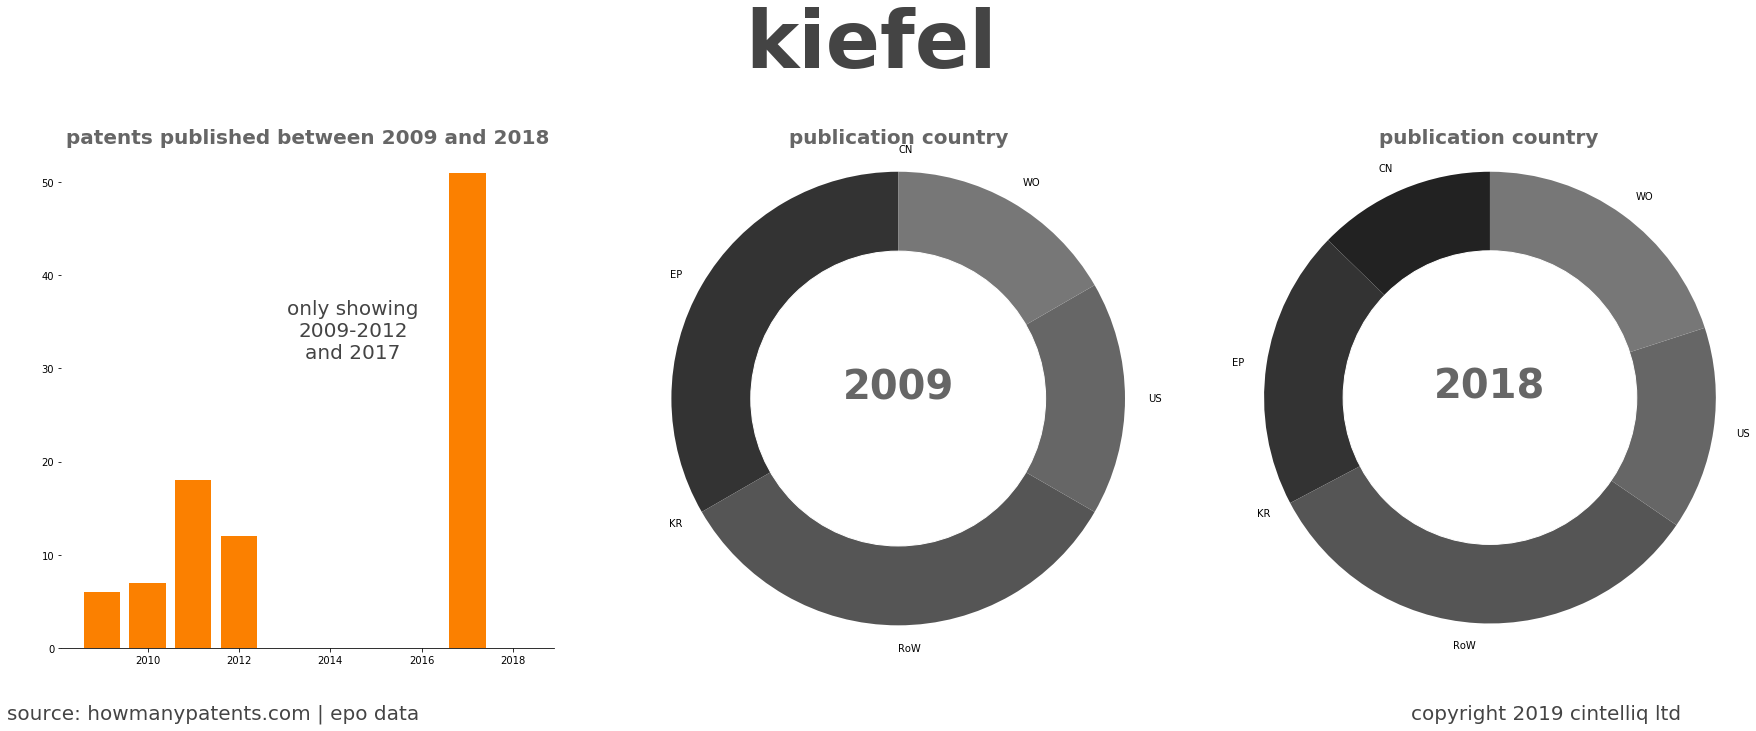 summary of patents for Kiefel